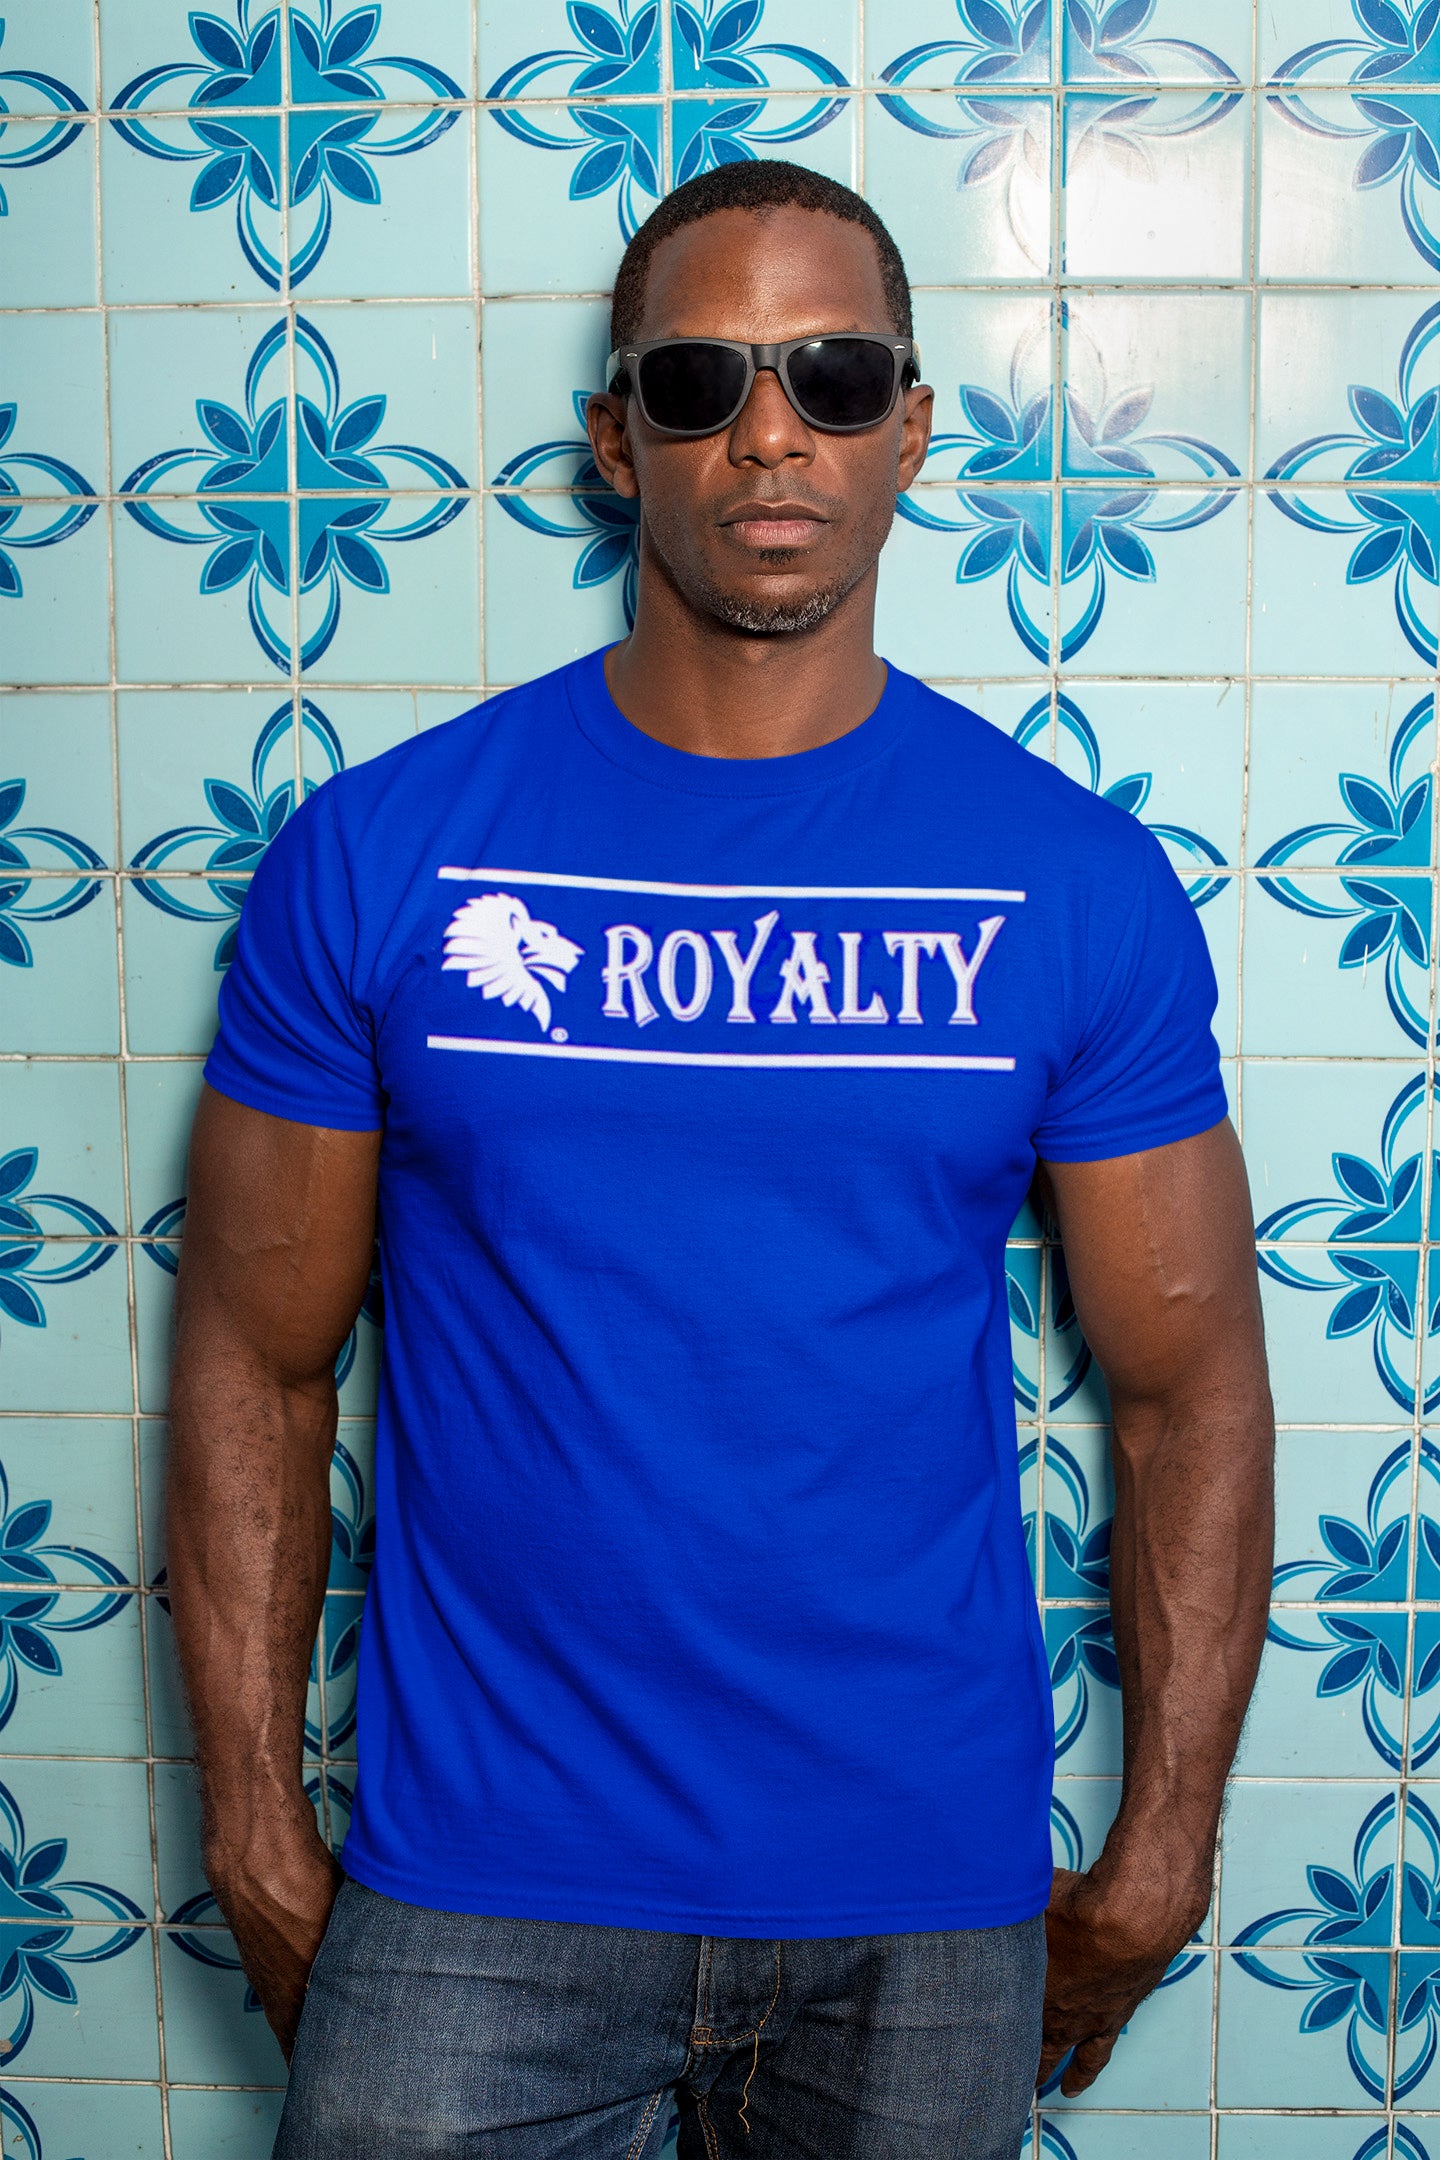 Model View #1 - Male Model showcasing the front of the Royalty T-shirt.